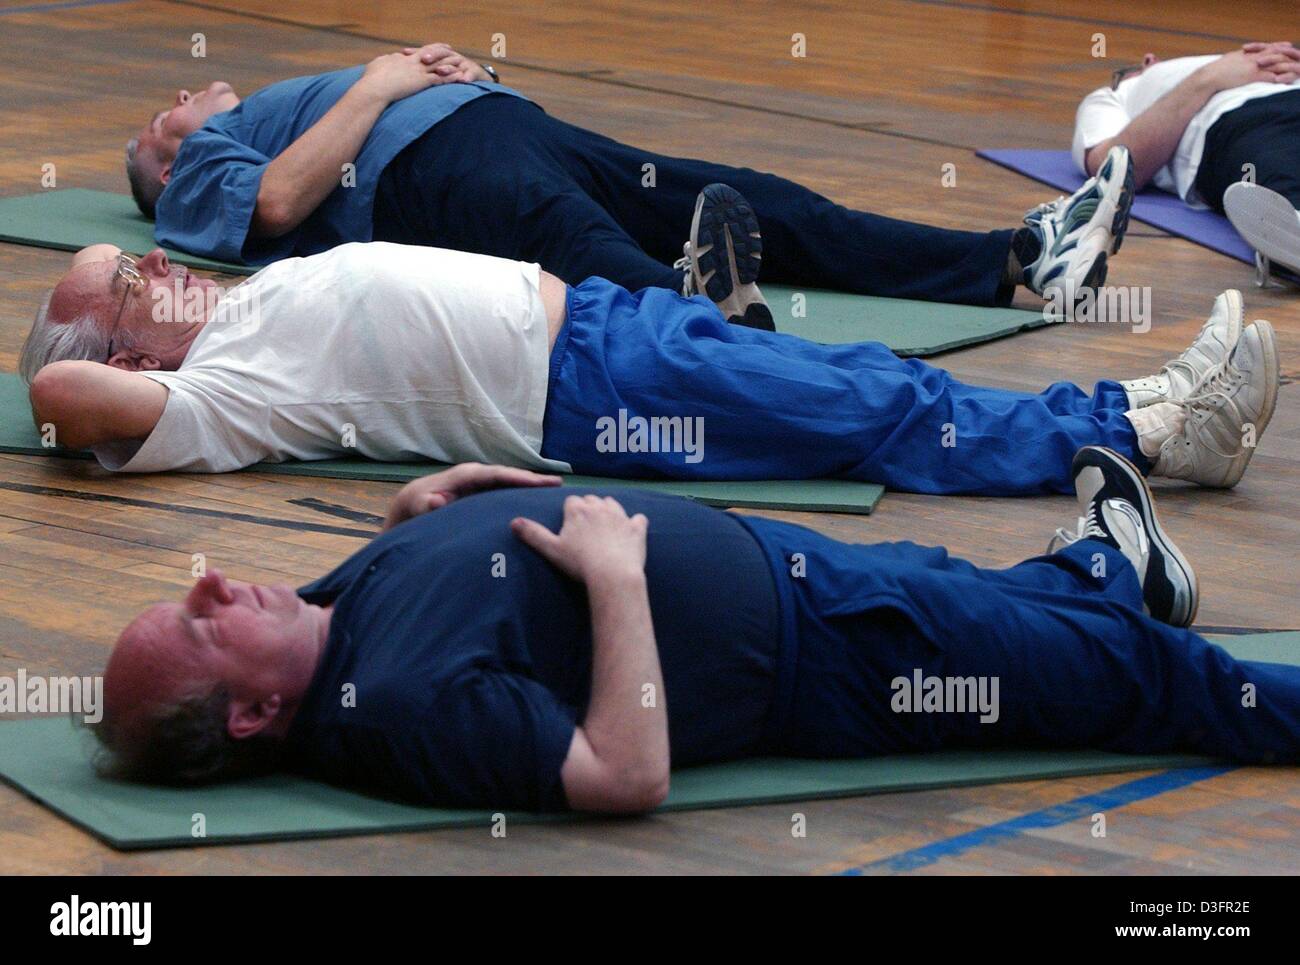 (dpa) - A group of senior citizens lie down on mats on the ground during an exercise programme at a sports club in Berlin, 28 April 2003. Senior women and men, members of the sports club, are keeping fit through sporting exercises. The Berlin regional sports association has around 529,529 members. 122,506 are over the age of 50. 23.1 percent are active in sports groups for seniors. Stock Photo